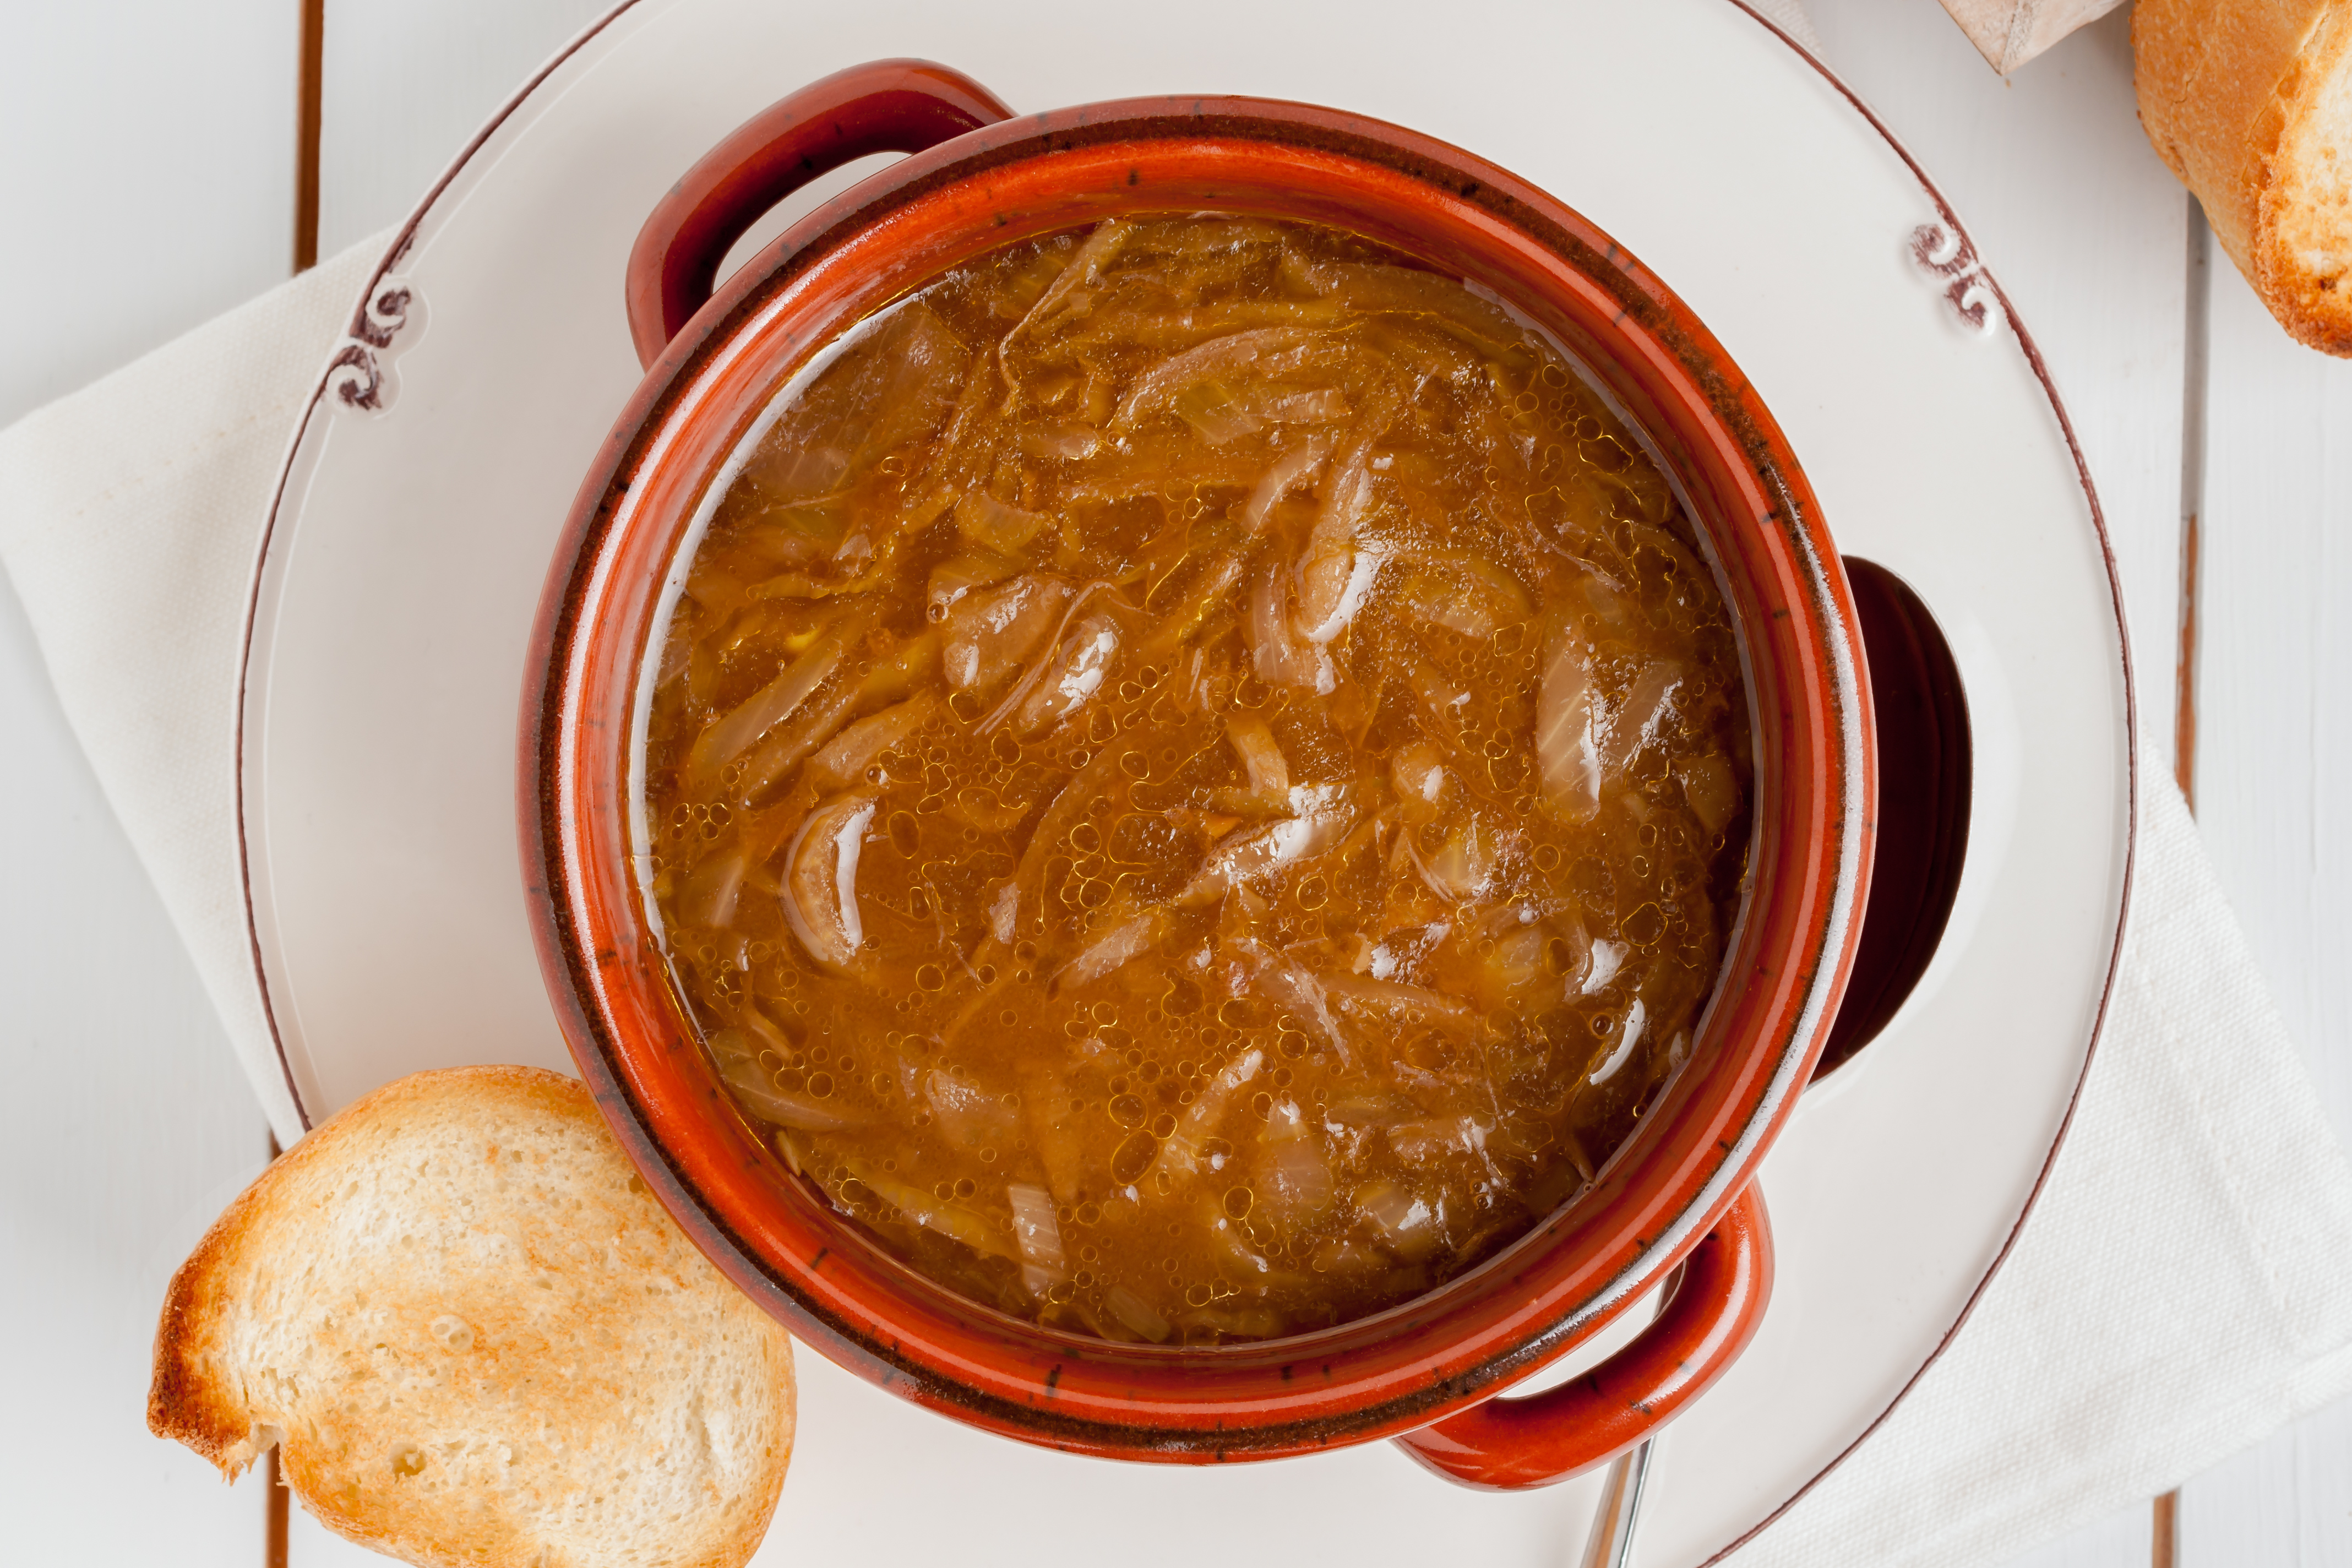 French Onion Soup | Source: Shutterstock